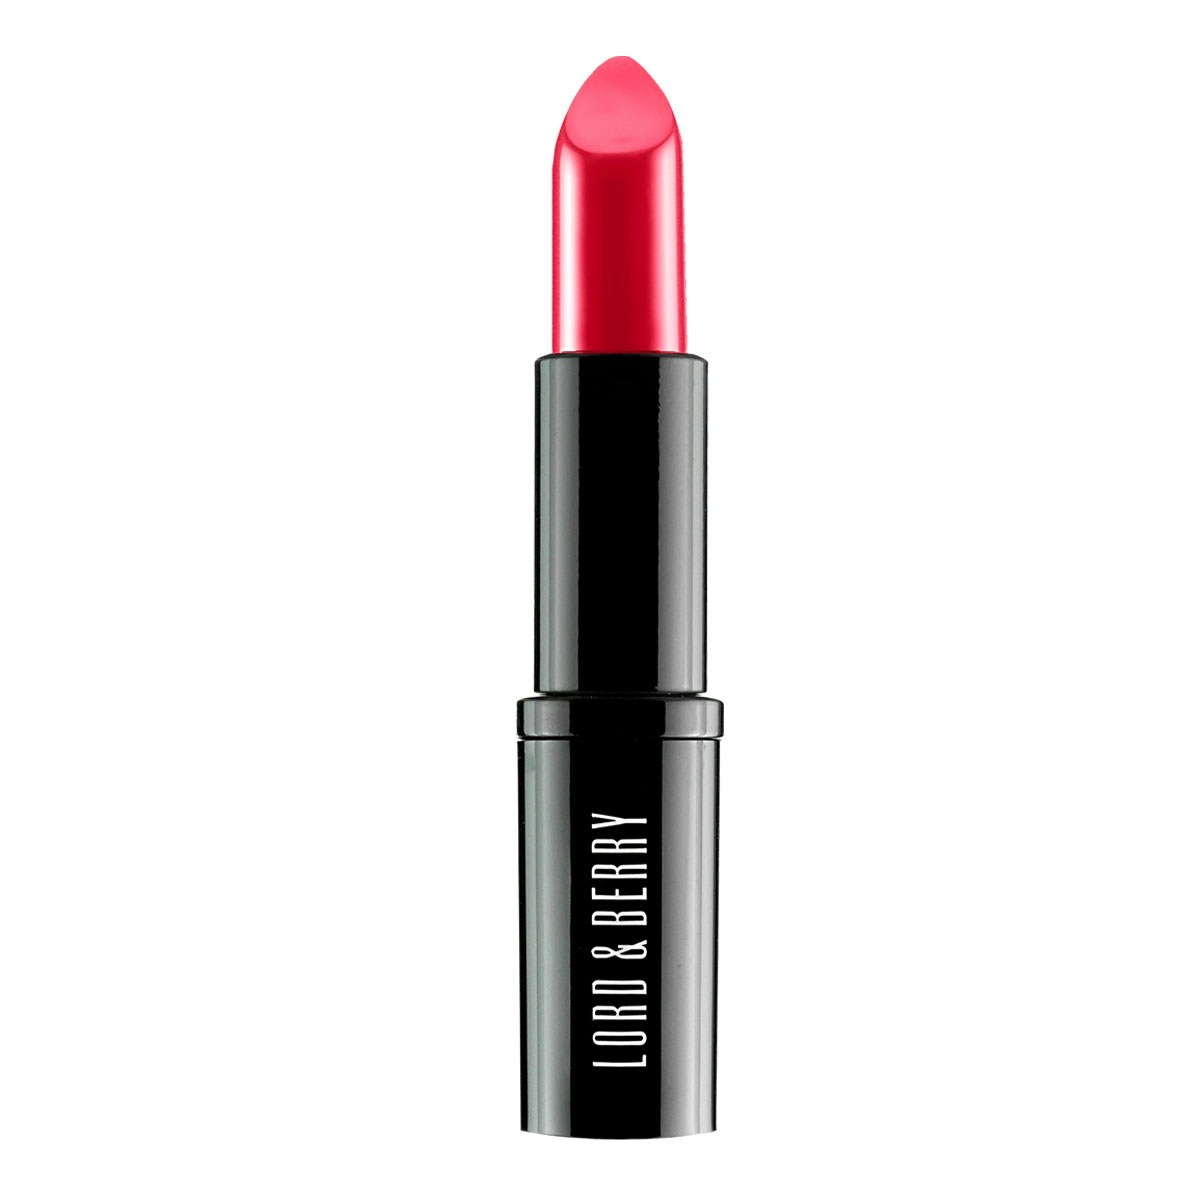 Lord & Berry Lips Lord and Berry - Vogue Matte Lipstick - Enchante - 23g